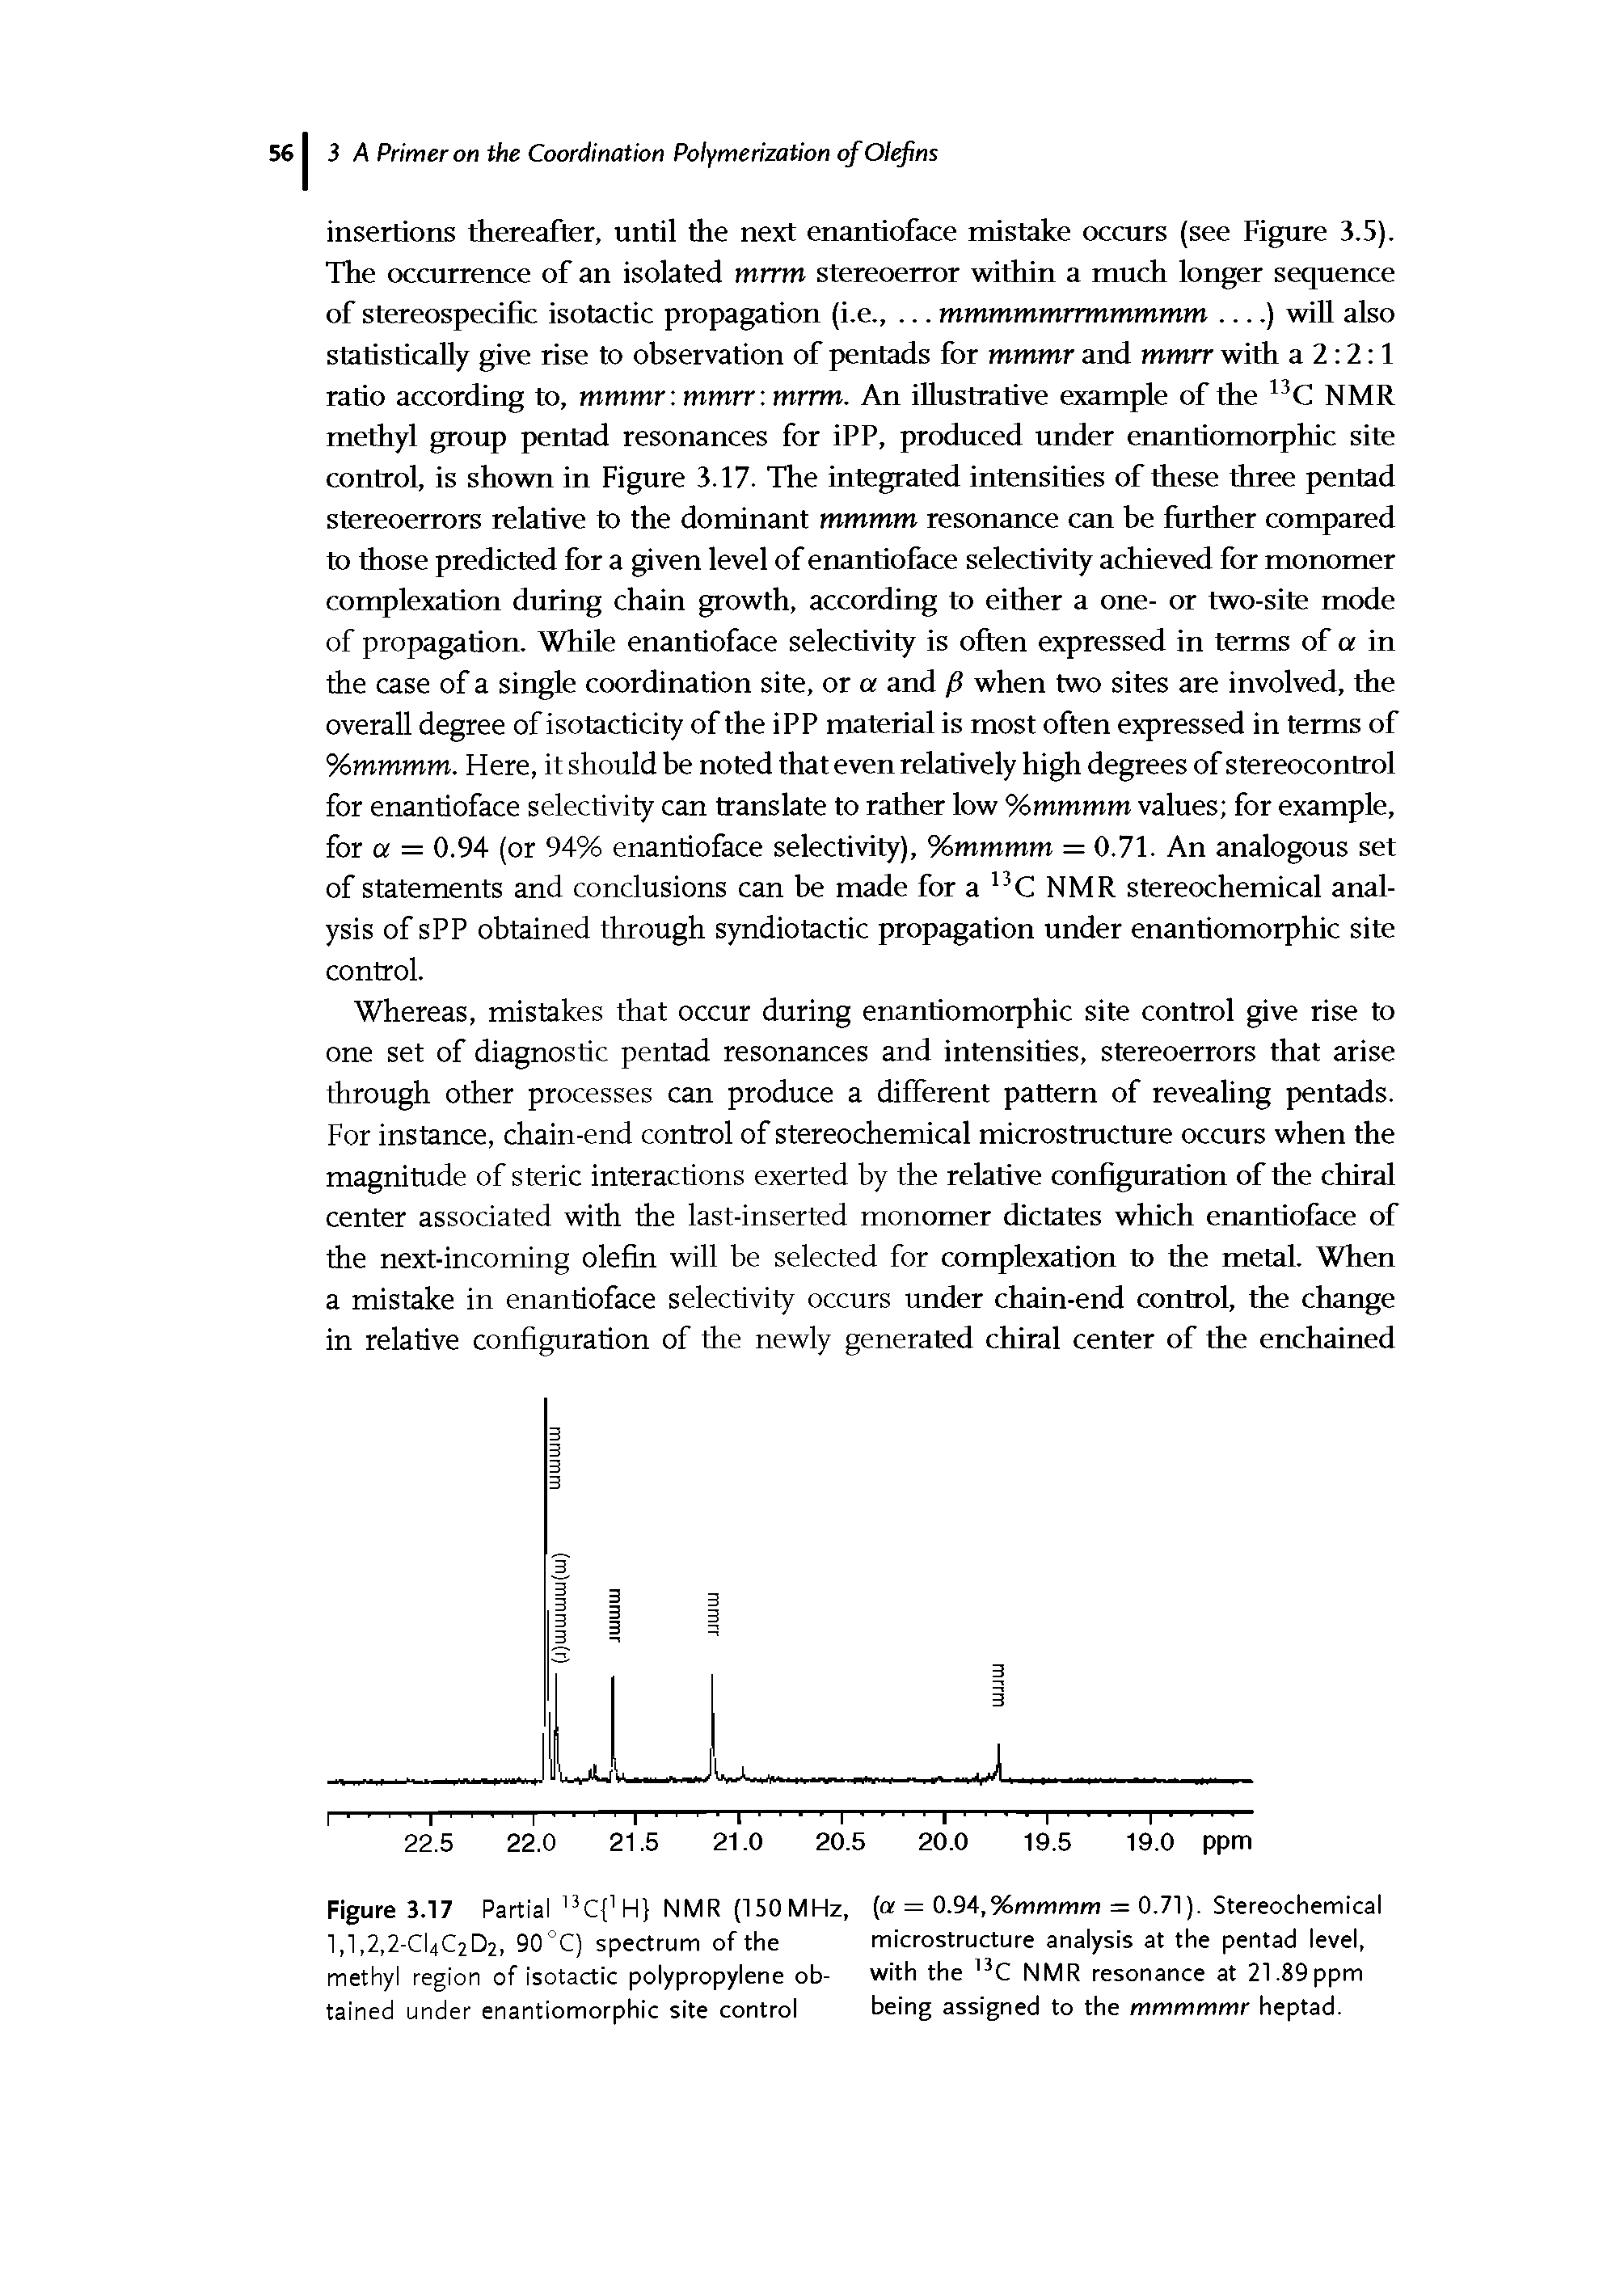 Figure 3.17 Partial C H NMR (150MHz, (a = 0.94,%mmmm = 0.71). Stereochemical l,l,2,2-Cl4C2D2, 90°C) spectrum of the microstructure analysis at the pentad level,...